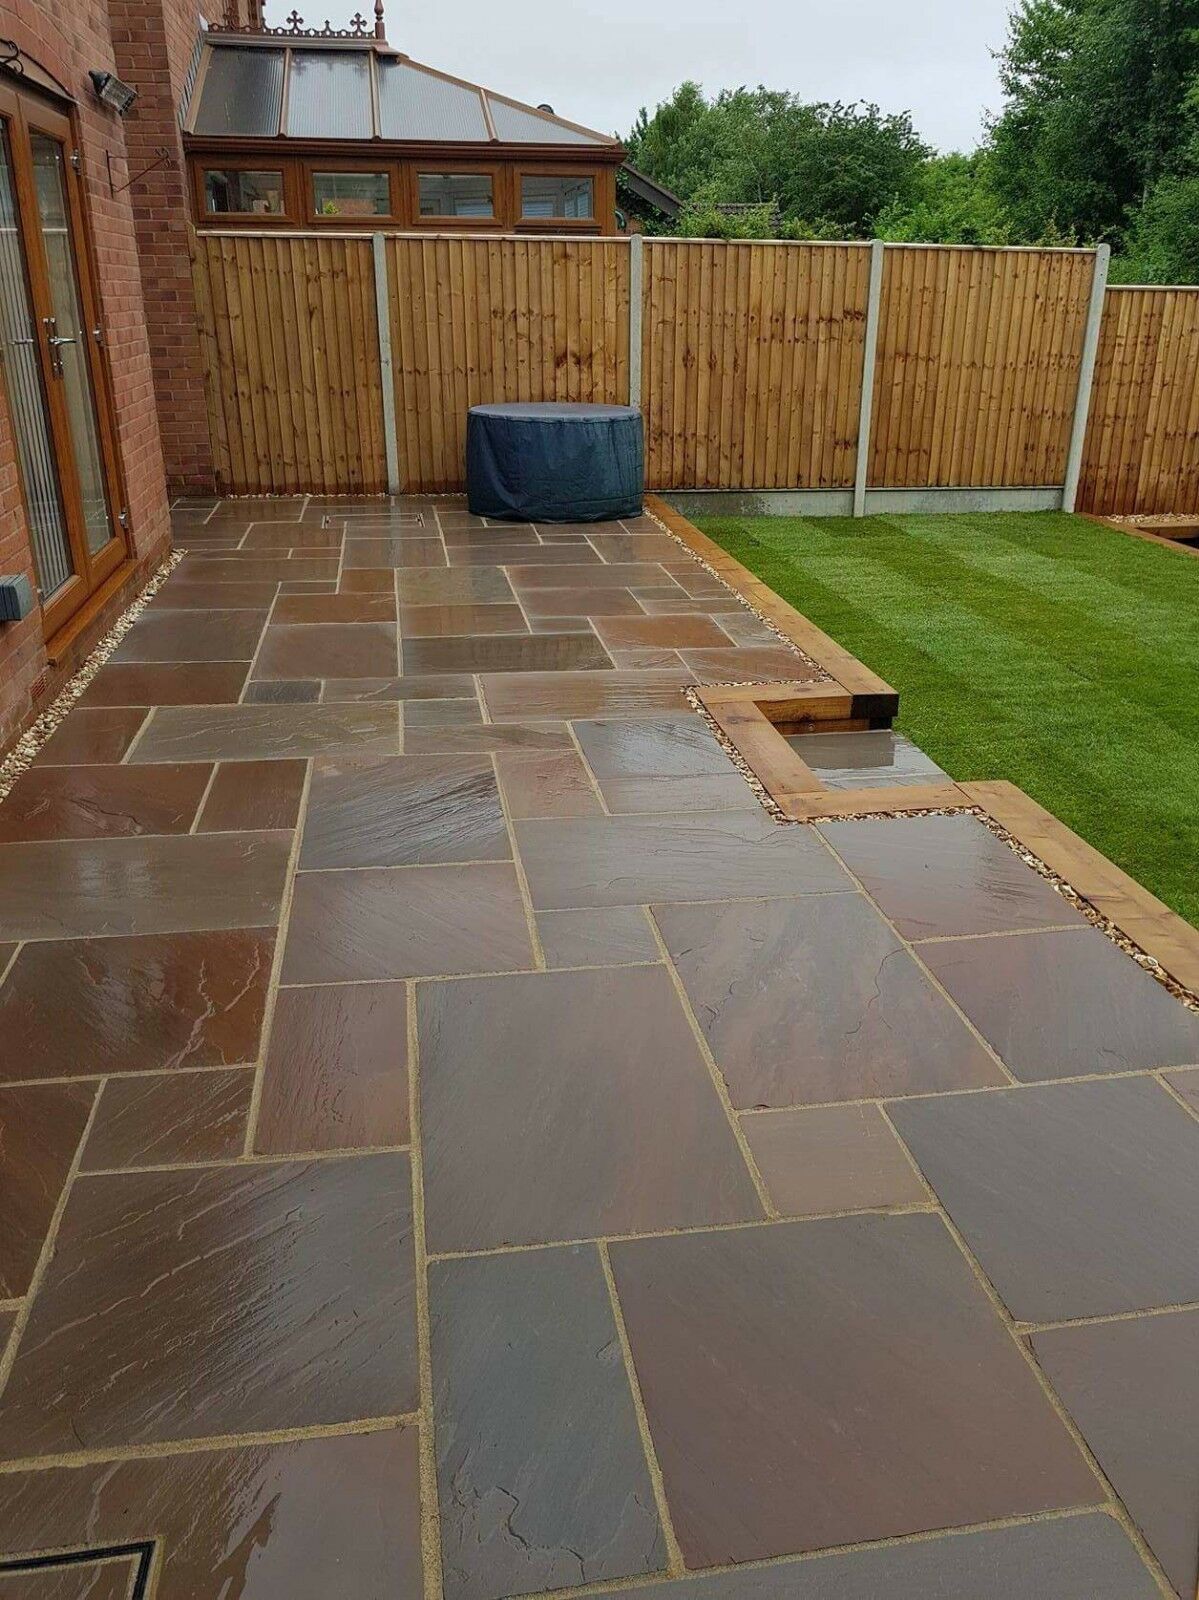 The Ultimate Guide to Choosing and Installing Garden Paving Slabs